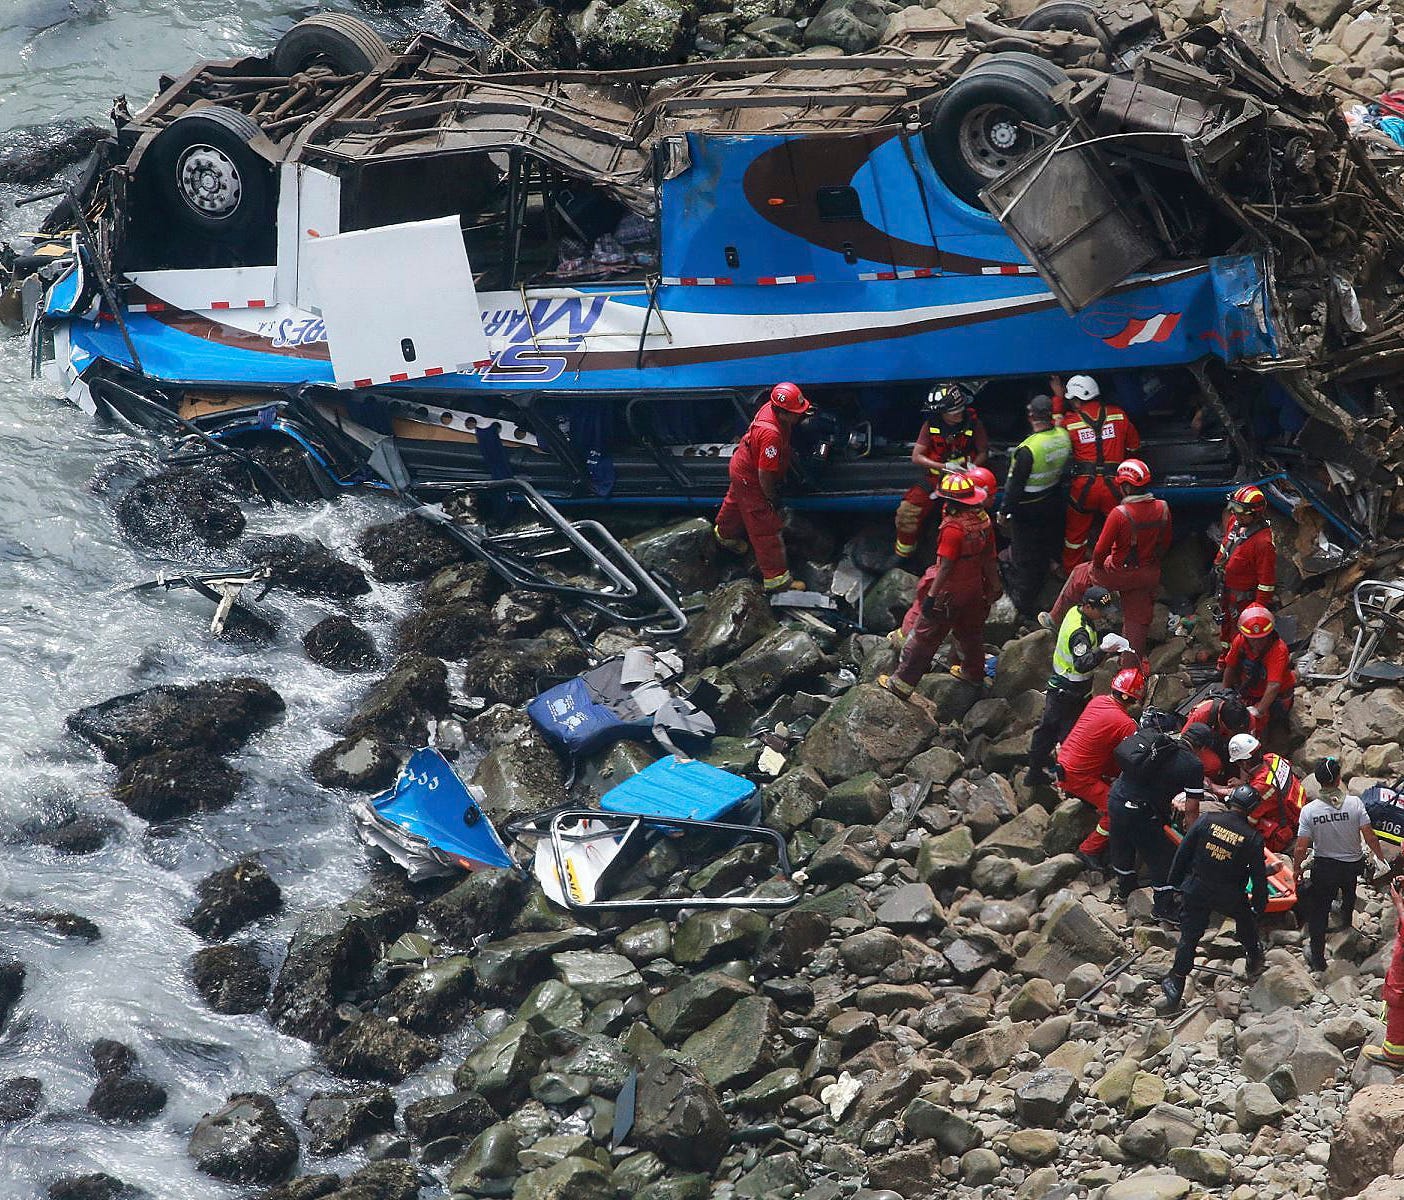 In this photo provided by the government news agency Andina, firemen recover bodies from a bus that fell off a cliff after it was hit by a tractor-trailer rig, in Pasamayo, Peru, Jan 2, 2018. A Peruvian police official says at least 25 people died, a